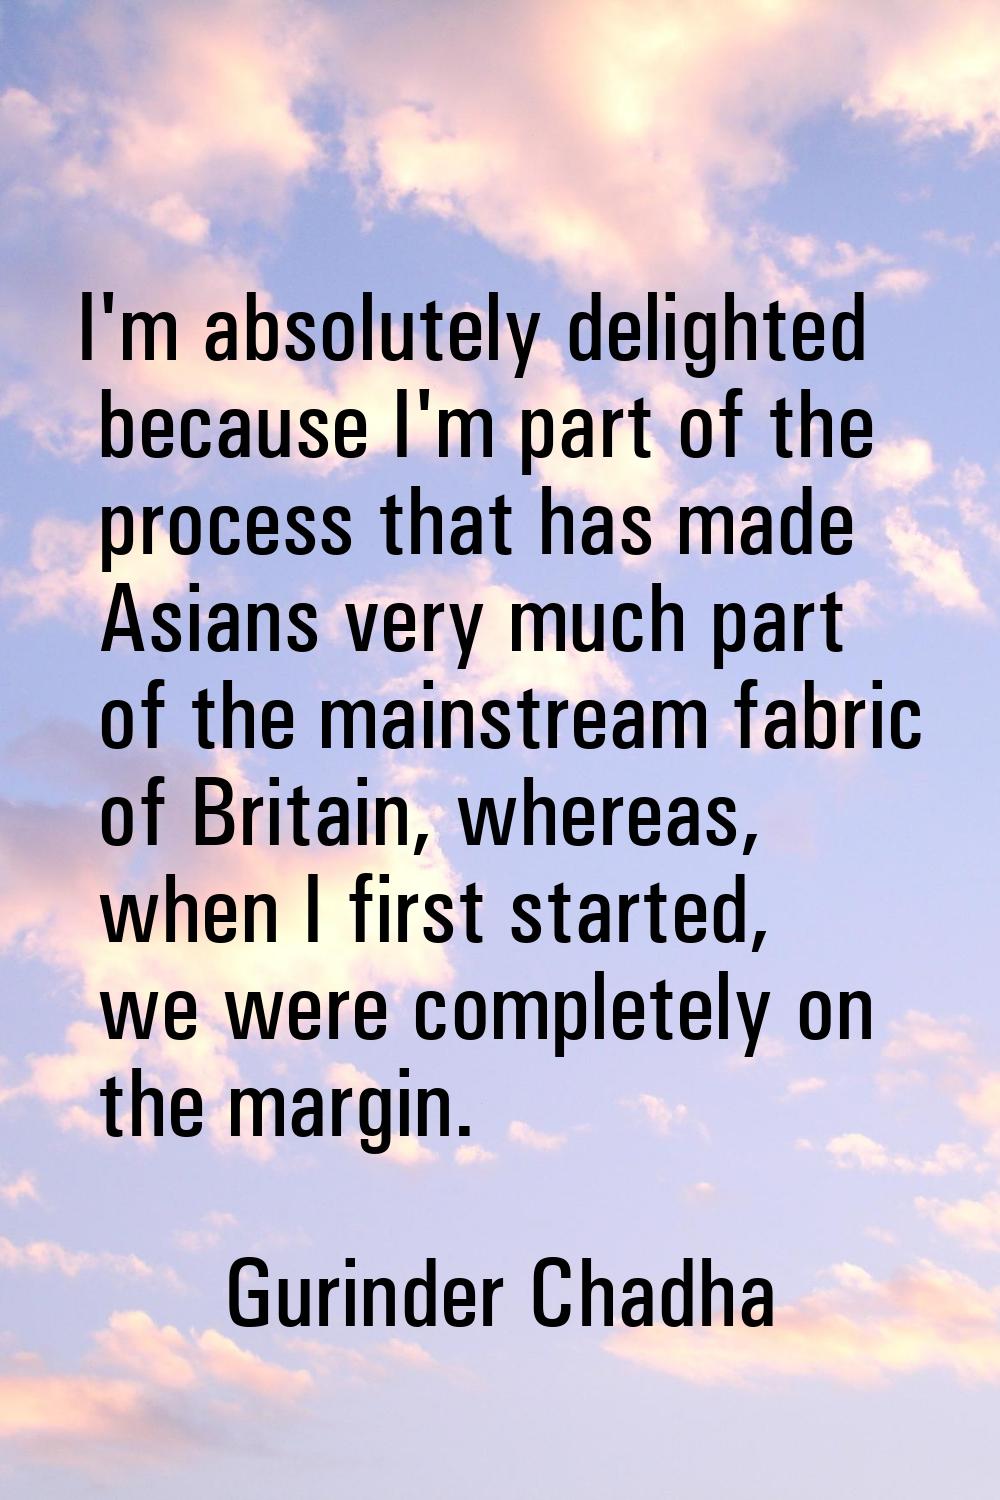 I'm absolutely delighted because I'm part of the process that has made Asians very much part of the